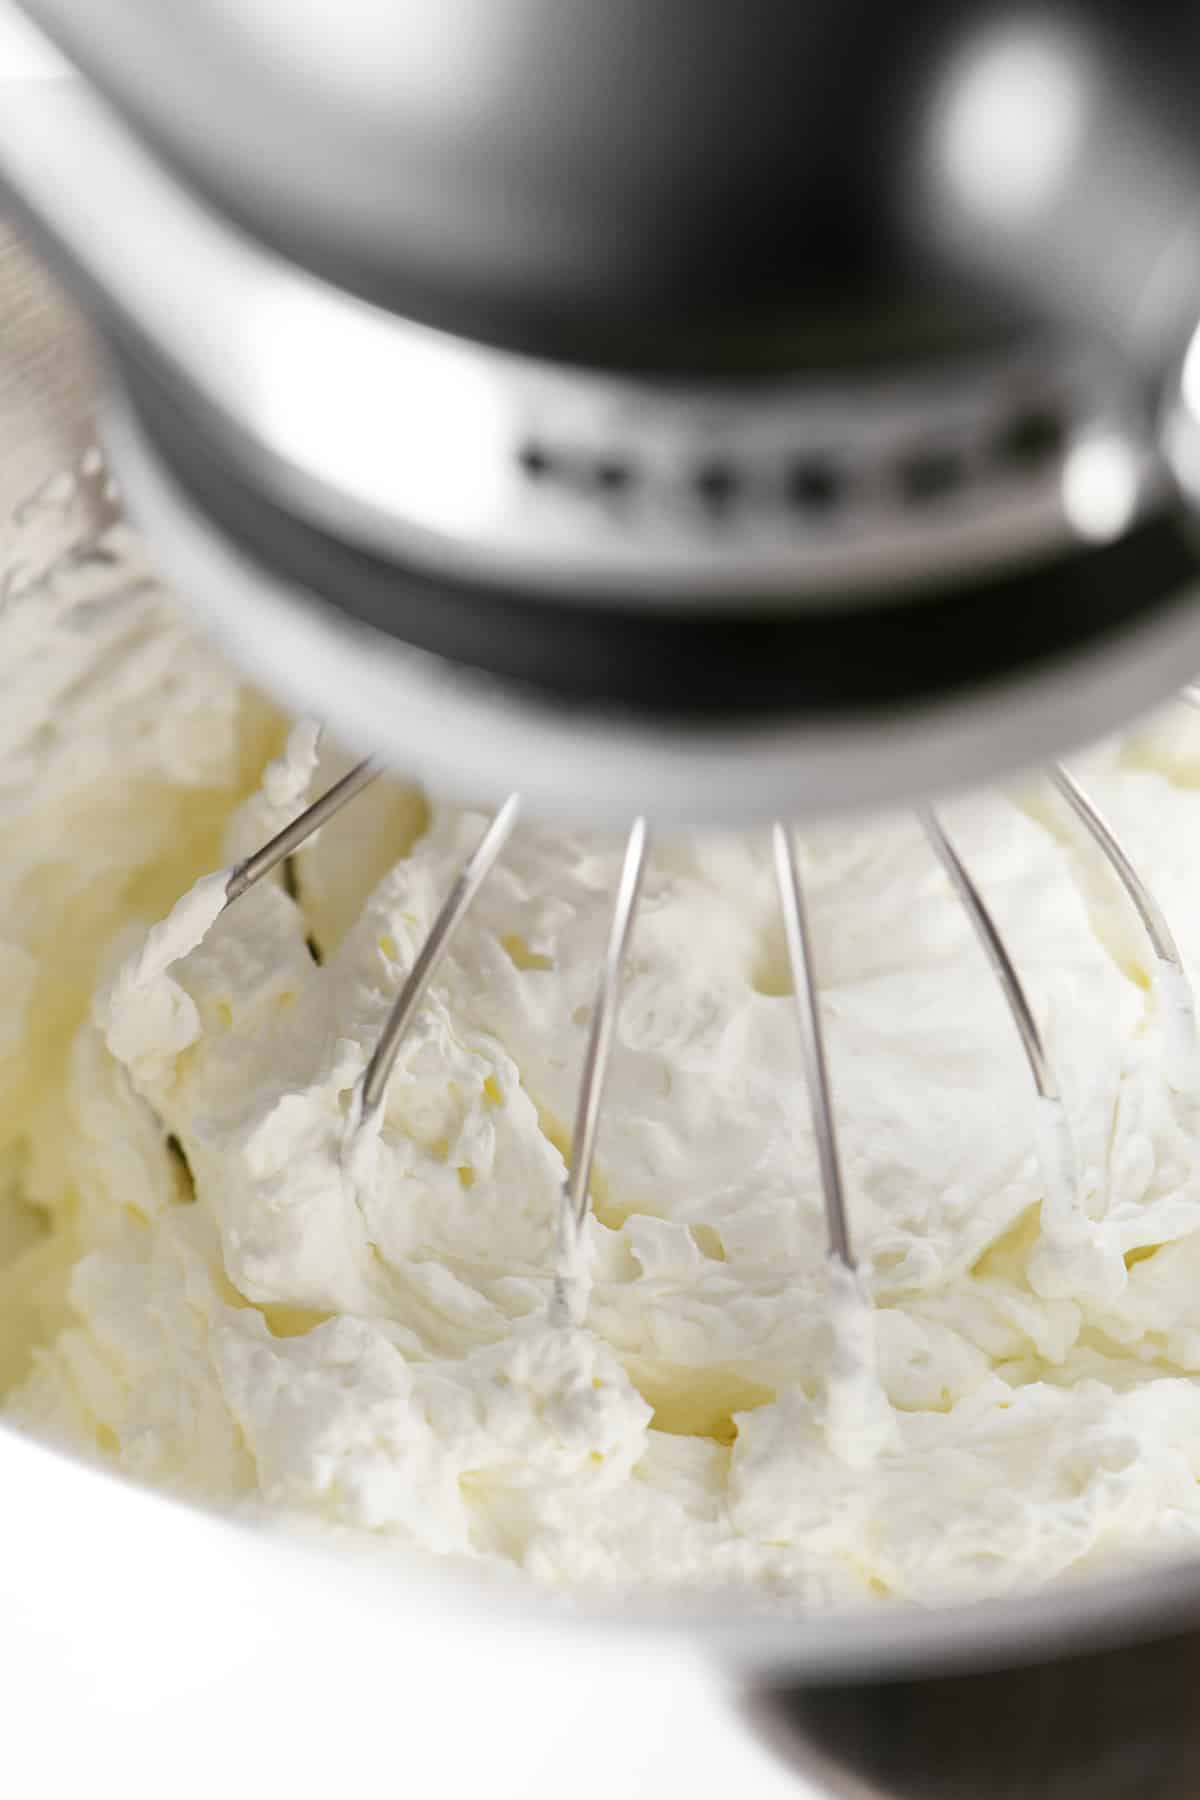 Whipped cream in a mixer.